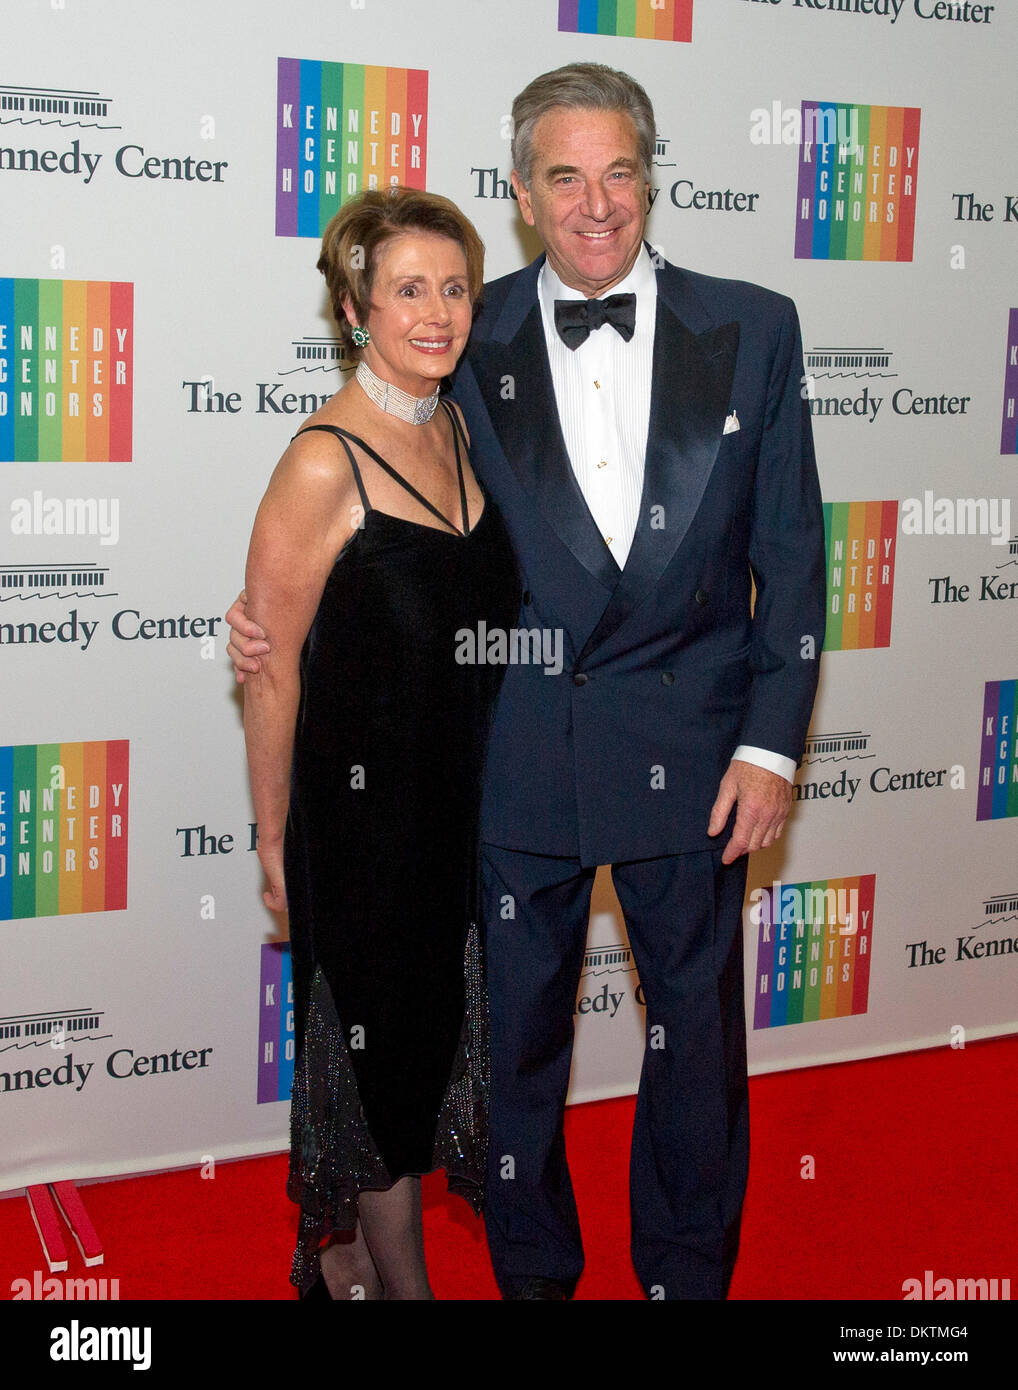 United States House Minority Leader Nancy Pelosi (Democrat of California) and her husband, Paul, arrive for the formal Artist's Dinner honoring the recipients of the 2013 Kennedy Center Honors hosted by United States Secretary of State John F. Kerry at the U.S. Department of State in Washington, DC on Saturday, December 7, 2013. Credit: Ron Sachs / CNP Stock Photo